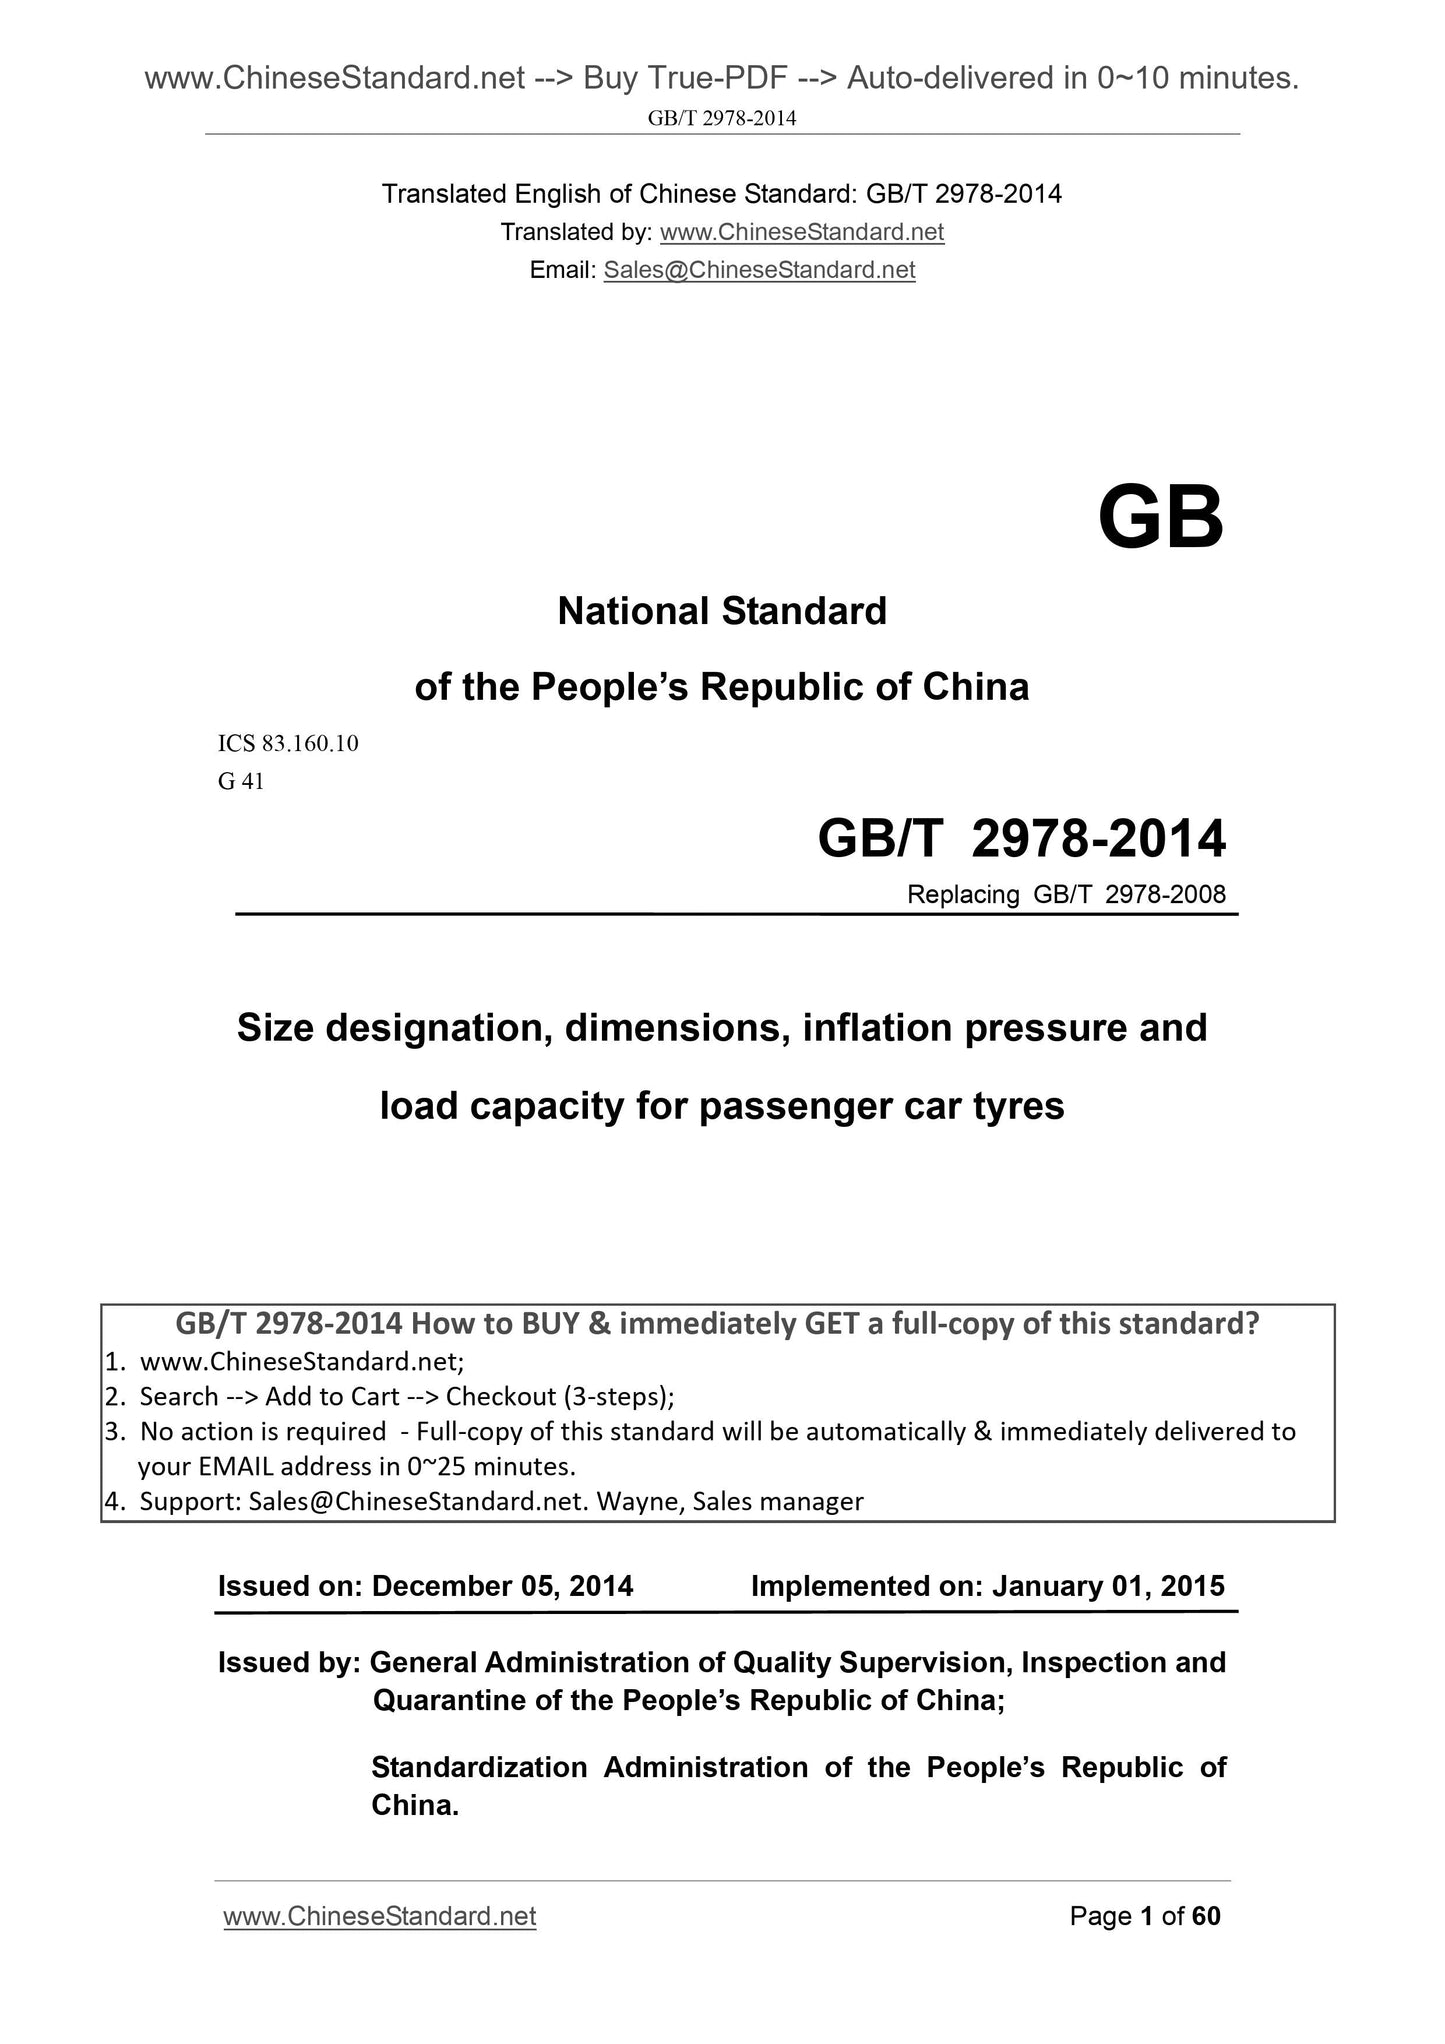 GB/T 2978-2014 Page 1